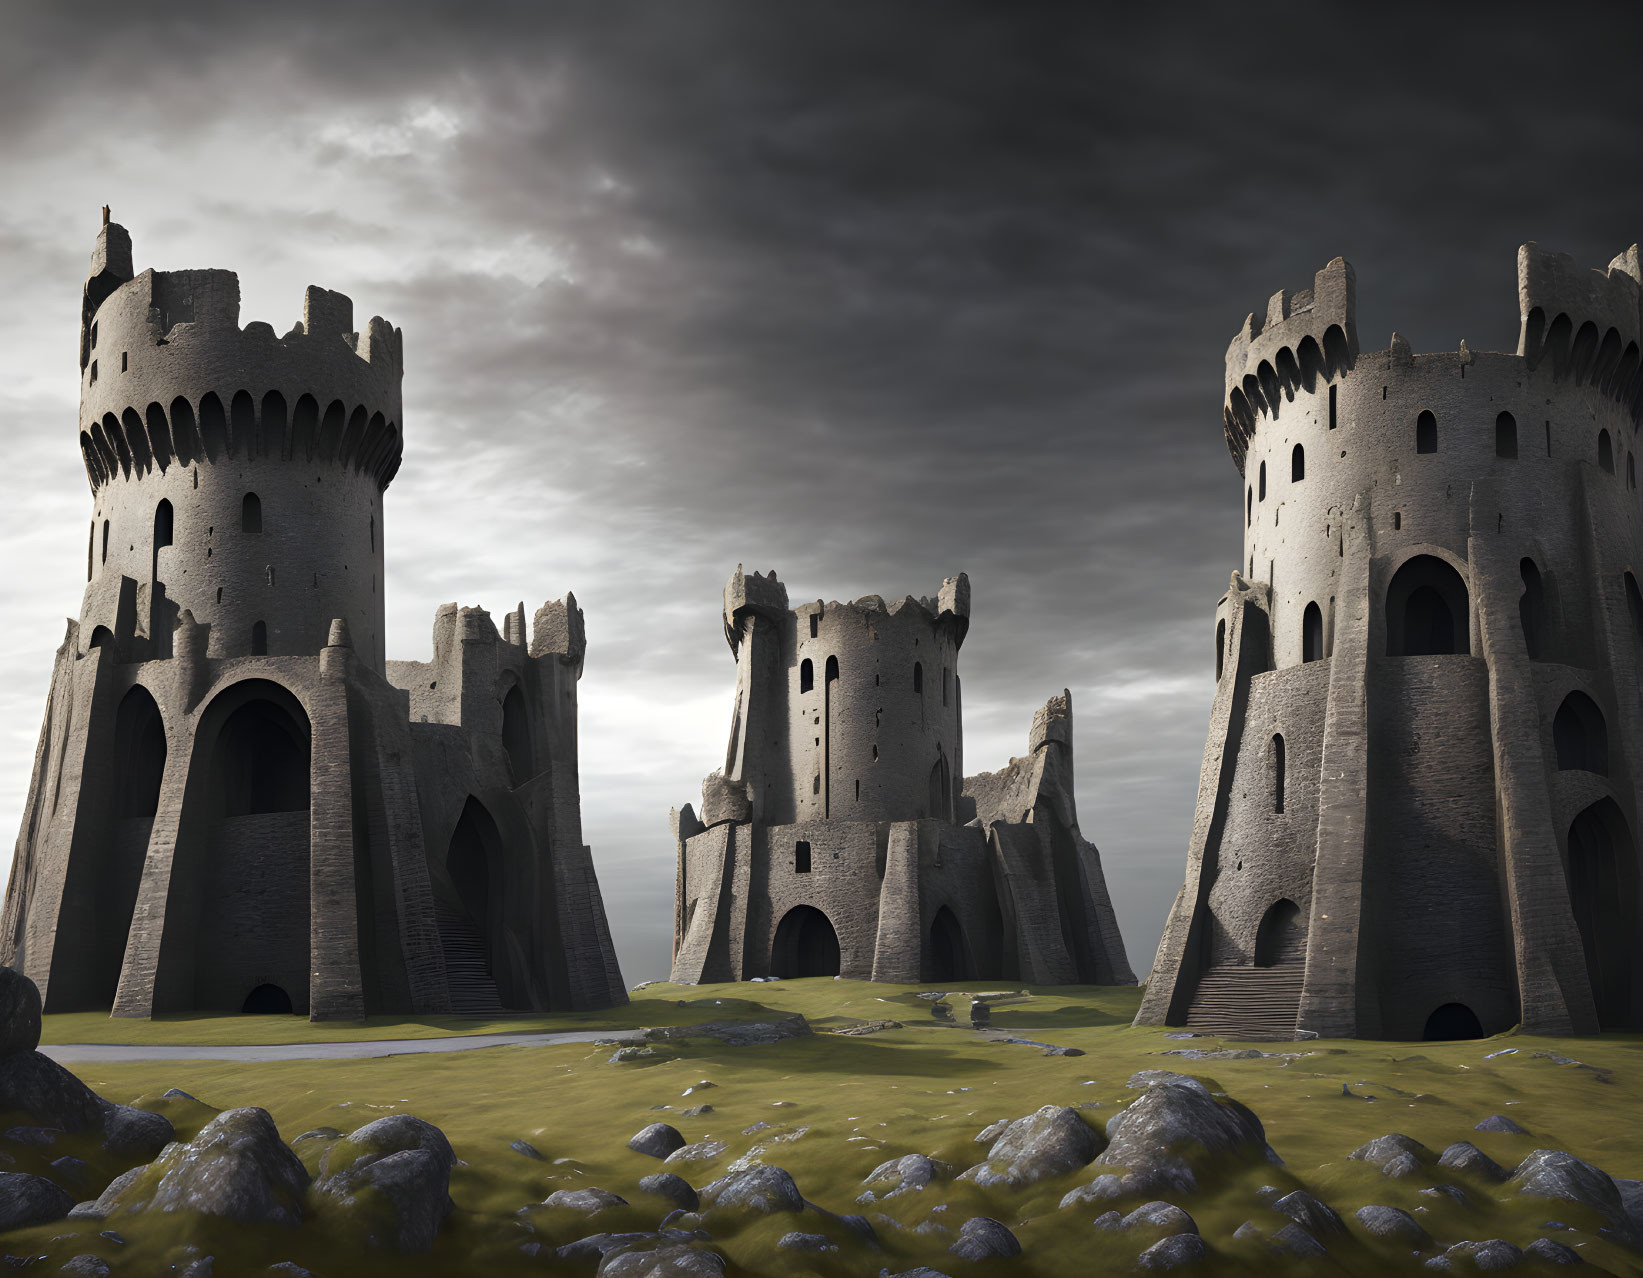 Medieval stone castles with tall towers and arched entryways under dramatic sky on rocky grassy